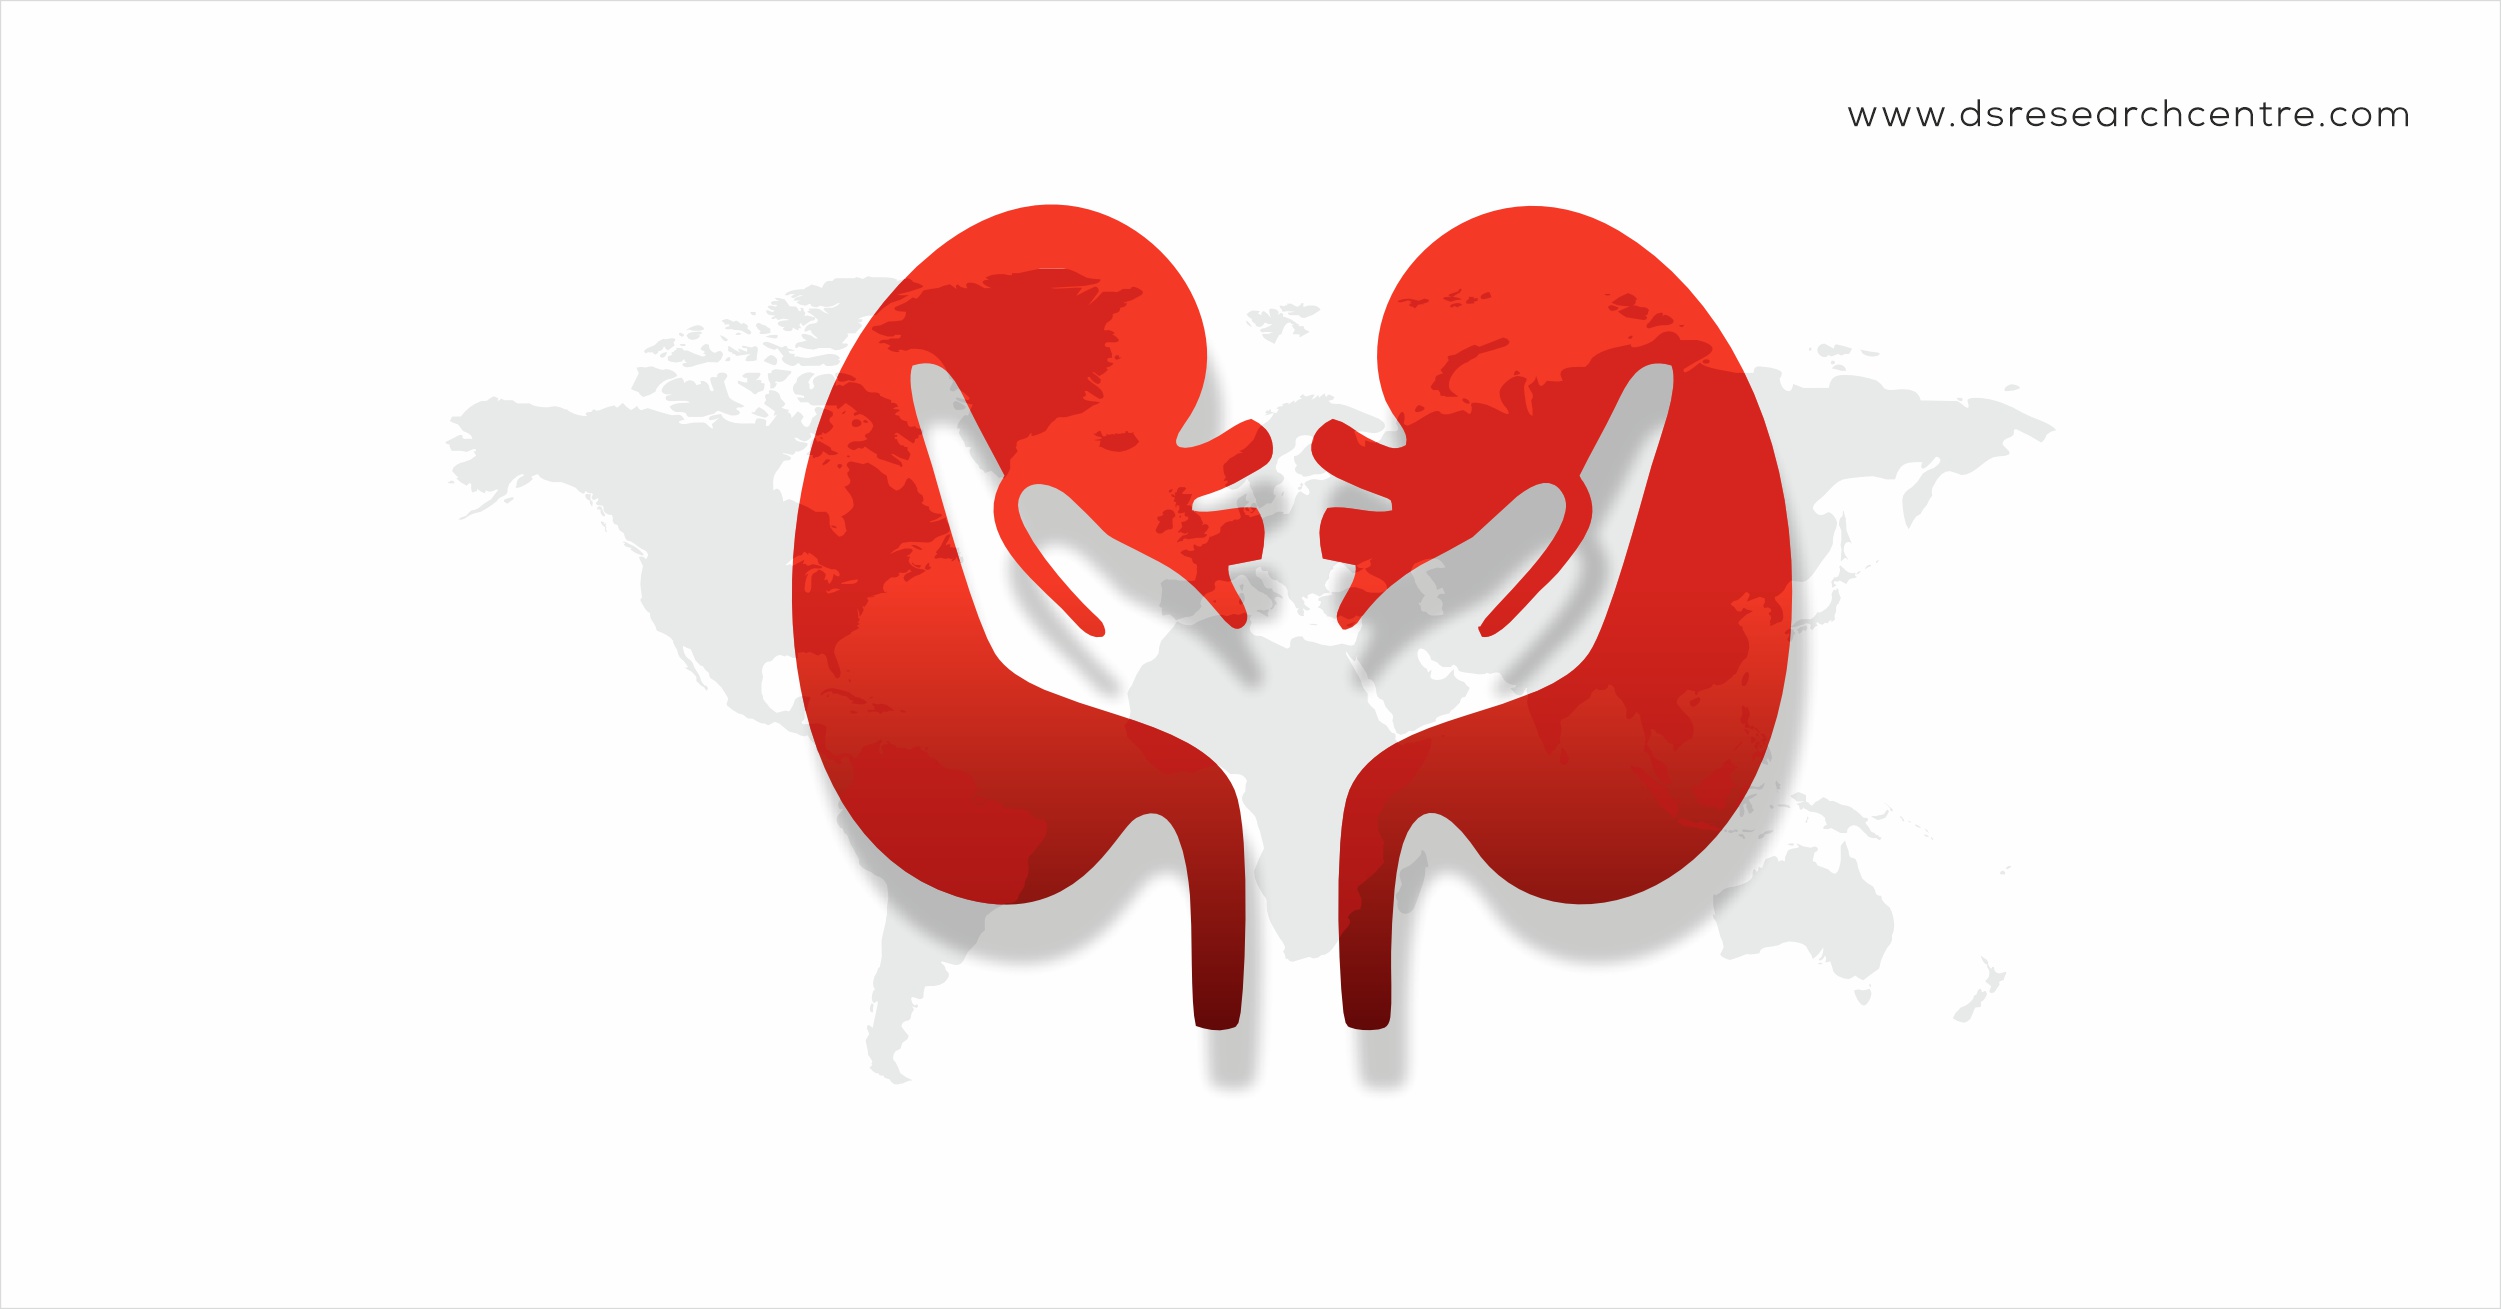 World Kidney Cancer Day - We Need To Talk